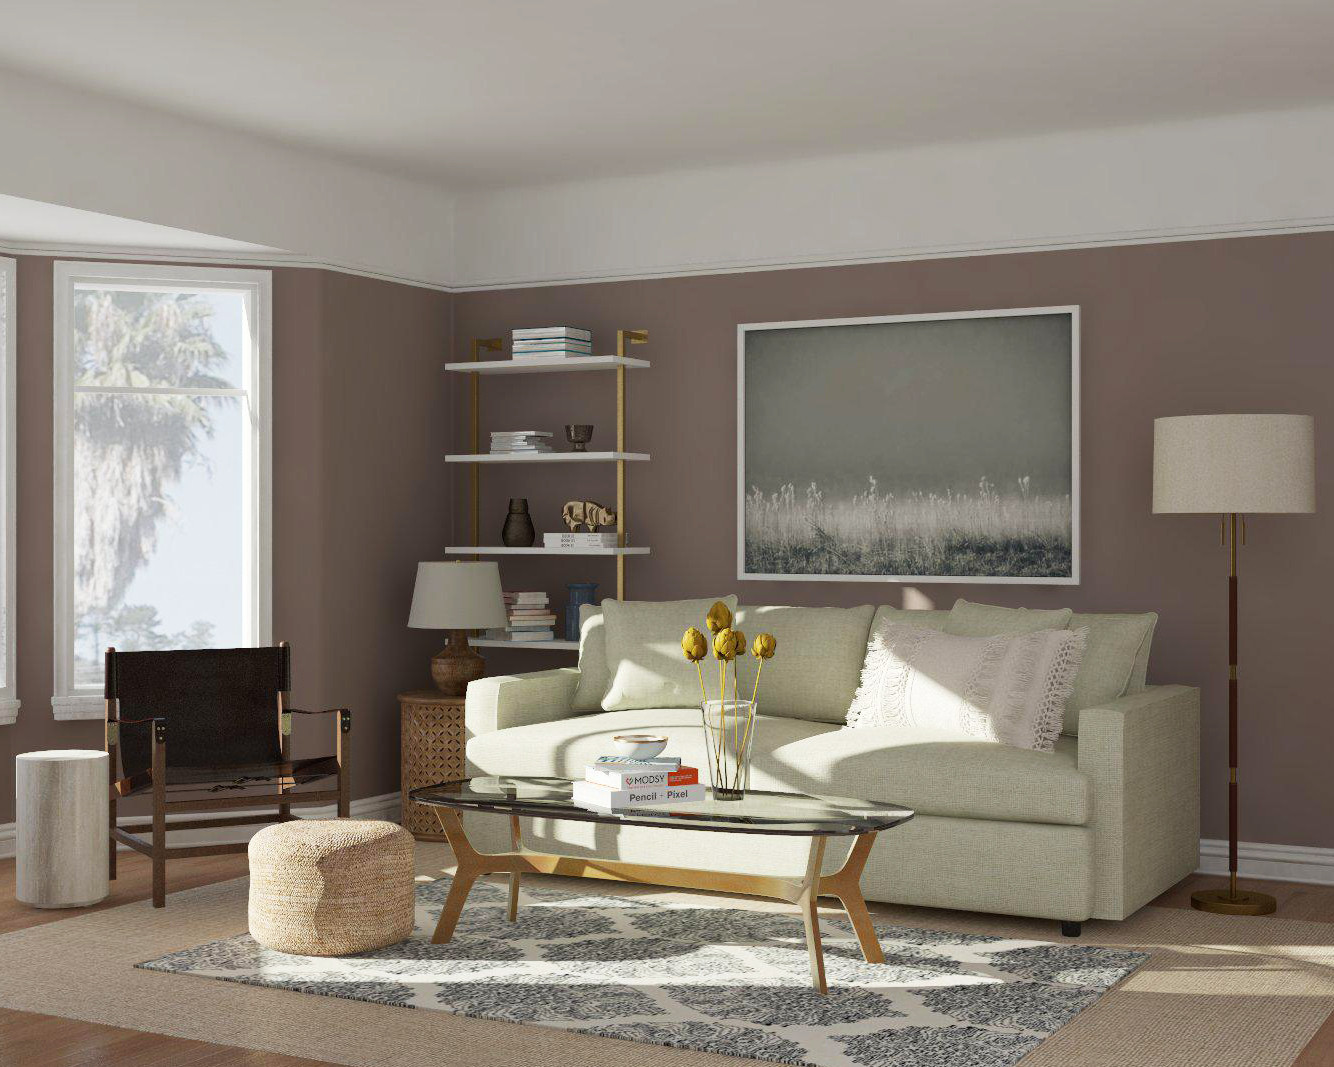 Living Room Paint Color Idea
 Transform Any Space With These Paint Color Ideas